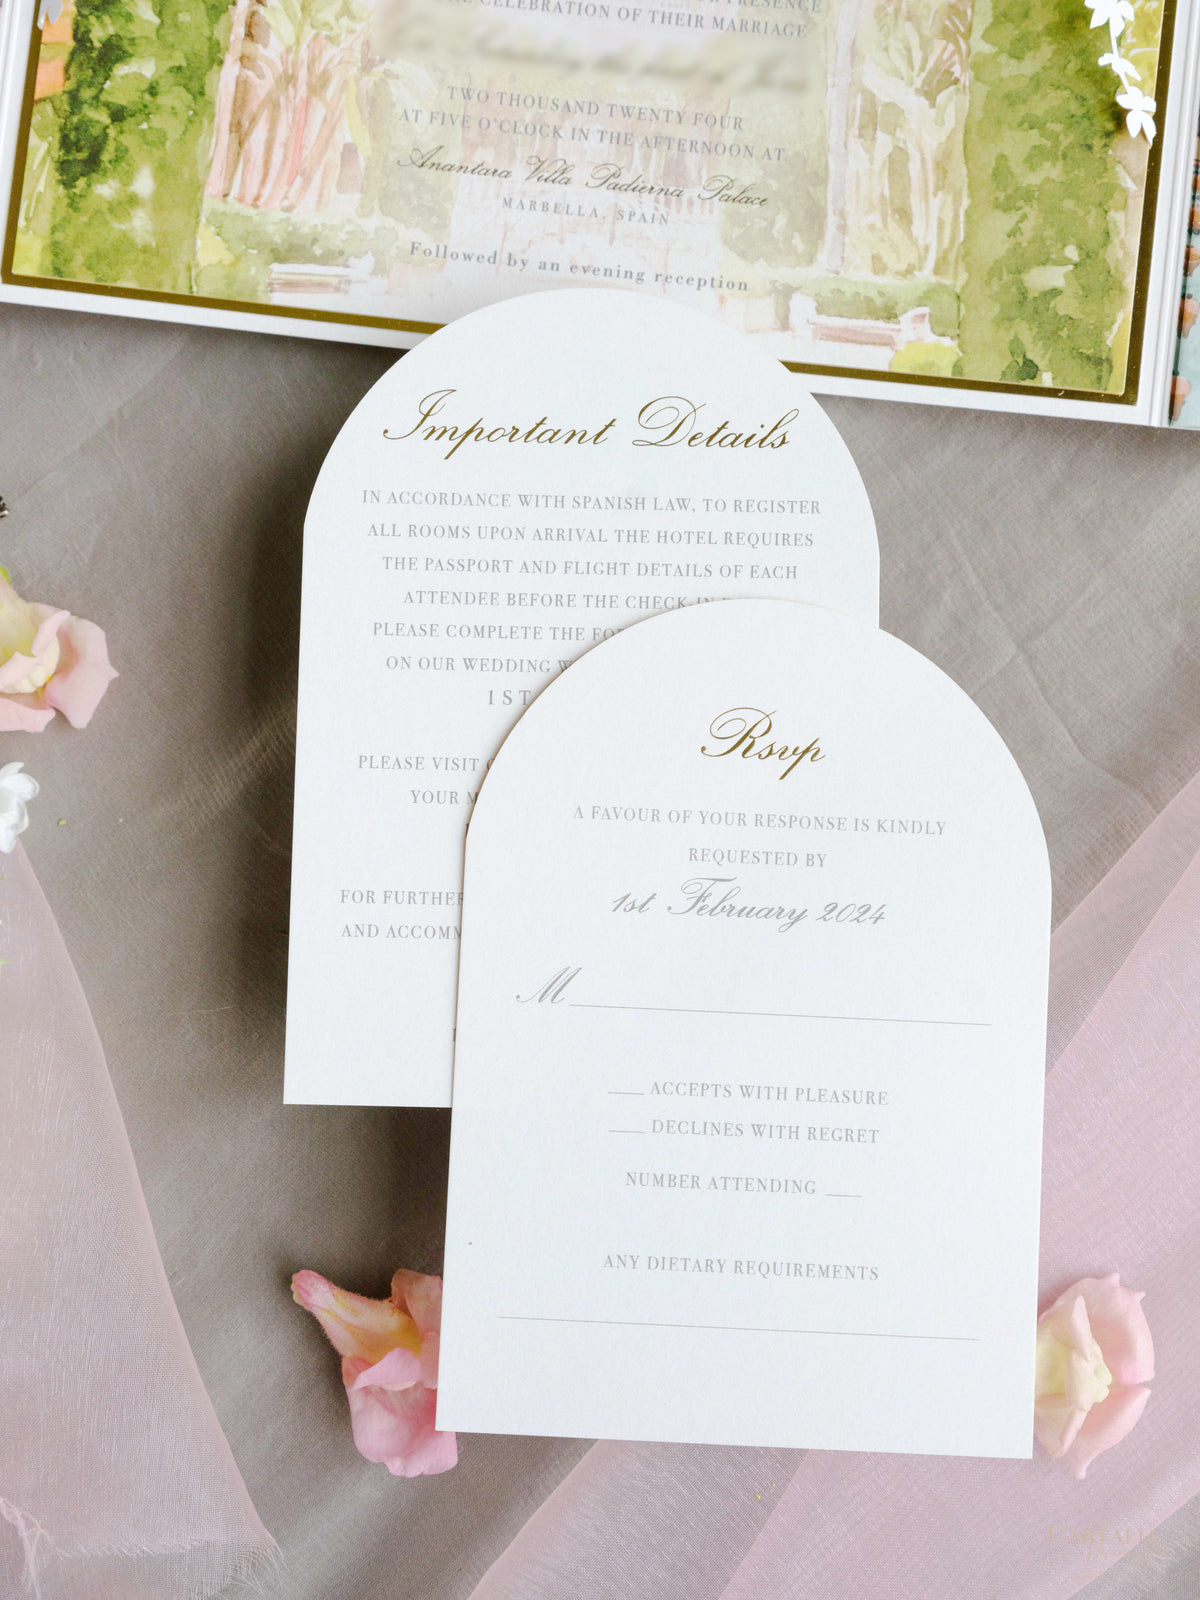 Luxury Wedding Invitation Suite with Watercolour Venue and Gold Foil | Villa Padierna Palace Marbella | Bespoke Commission for B&H